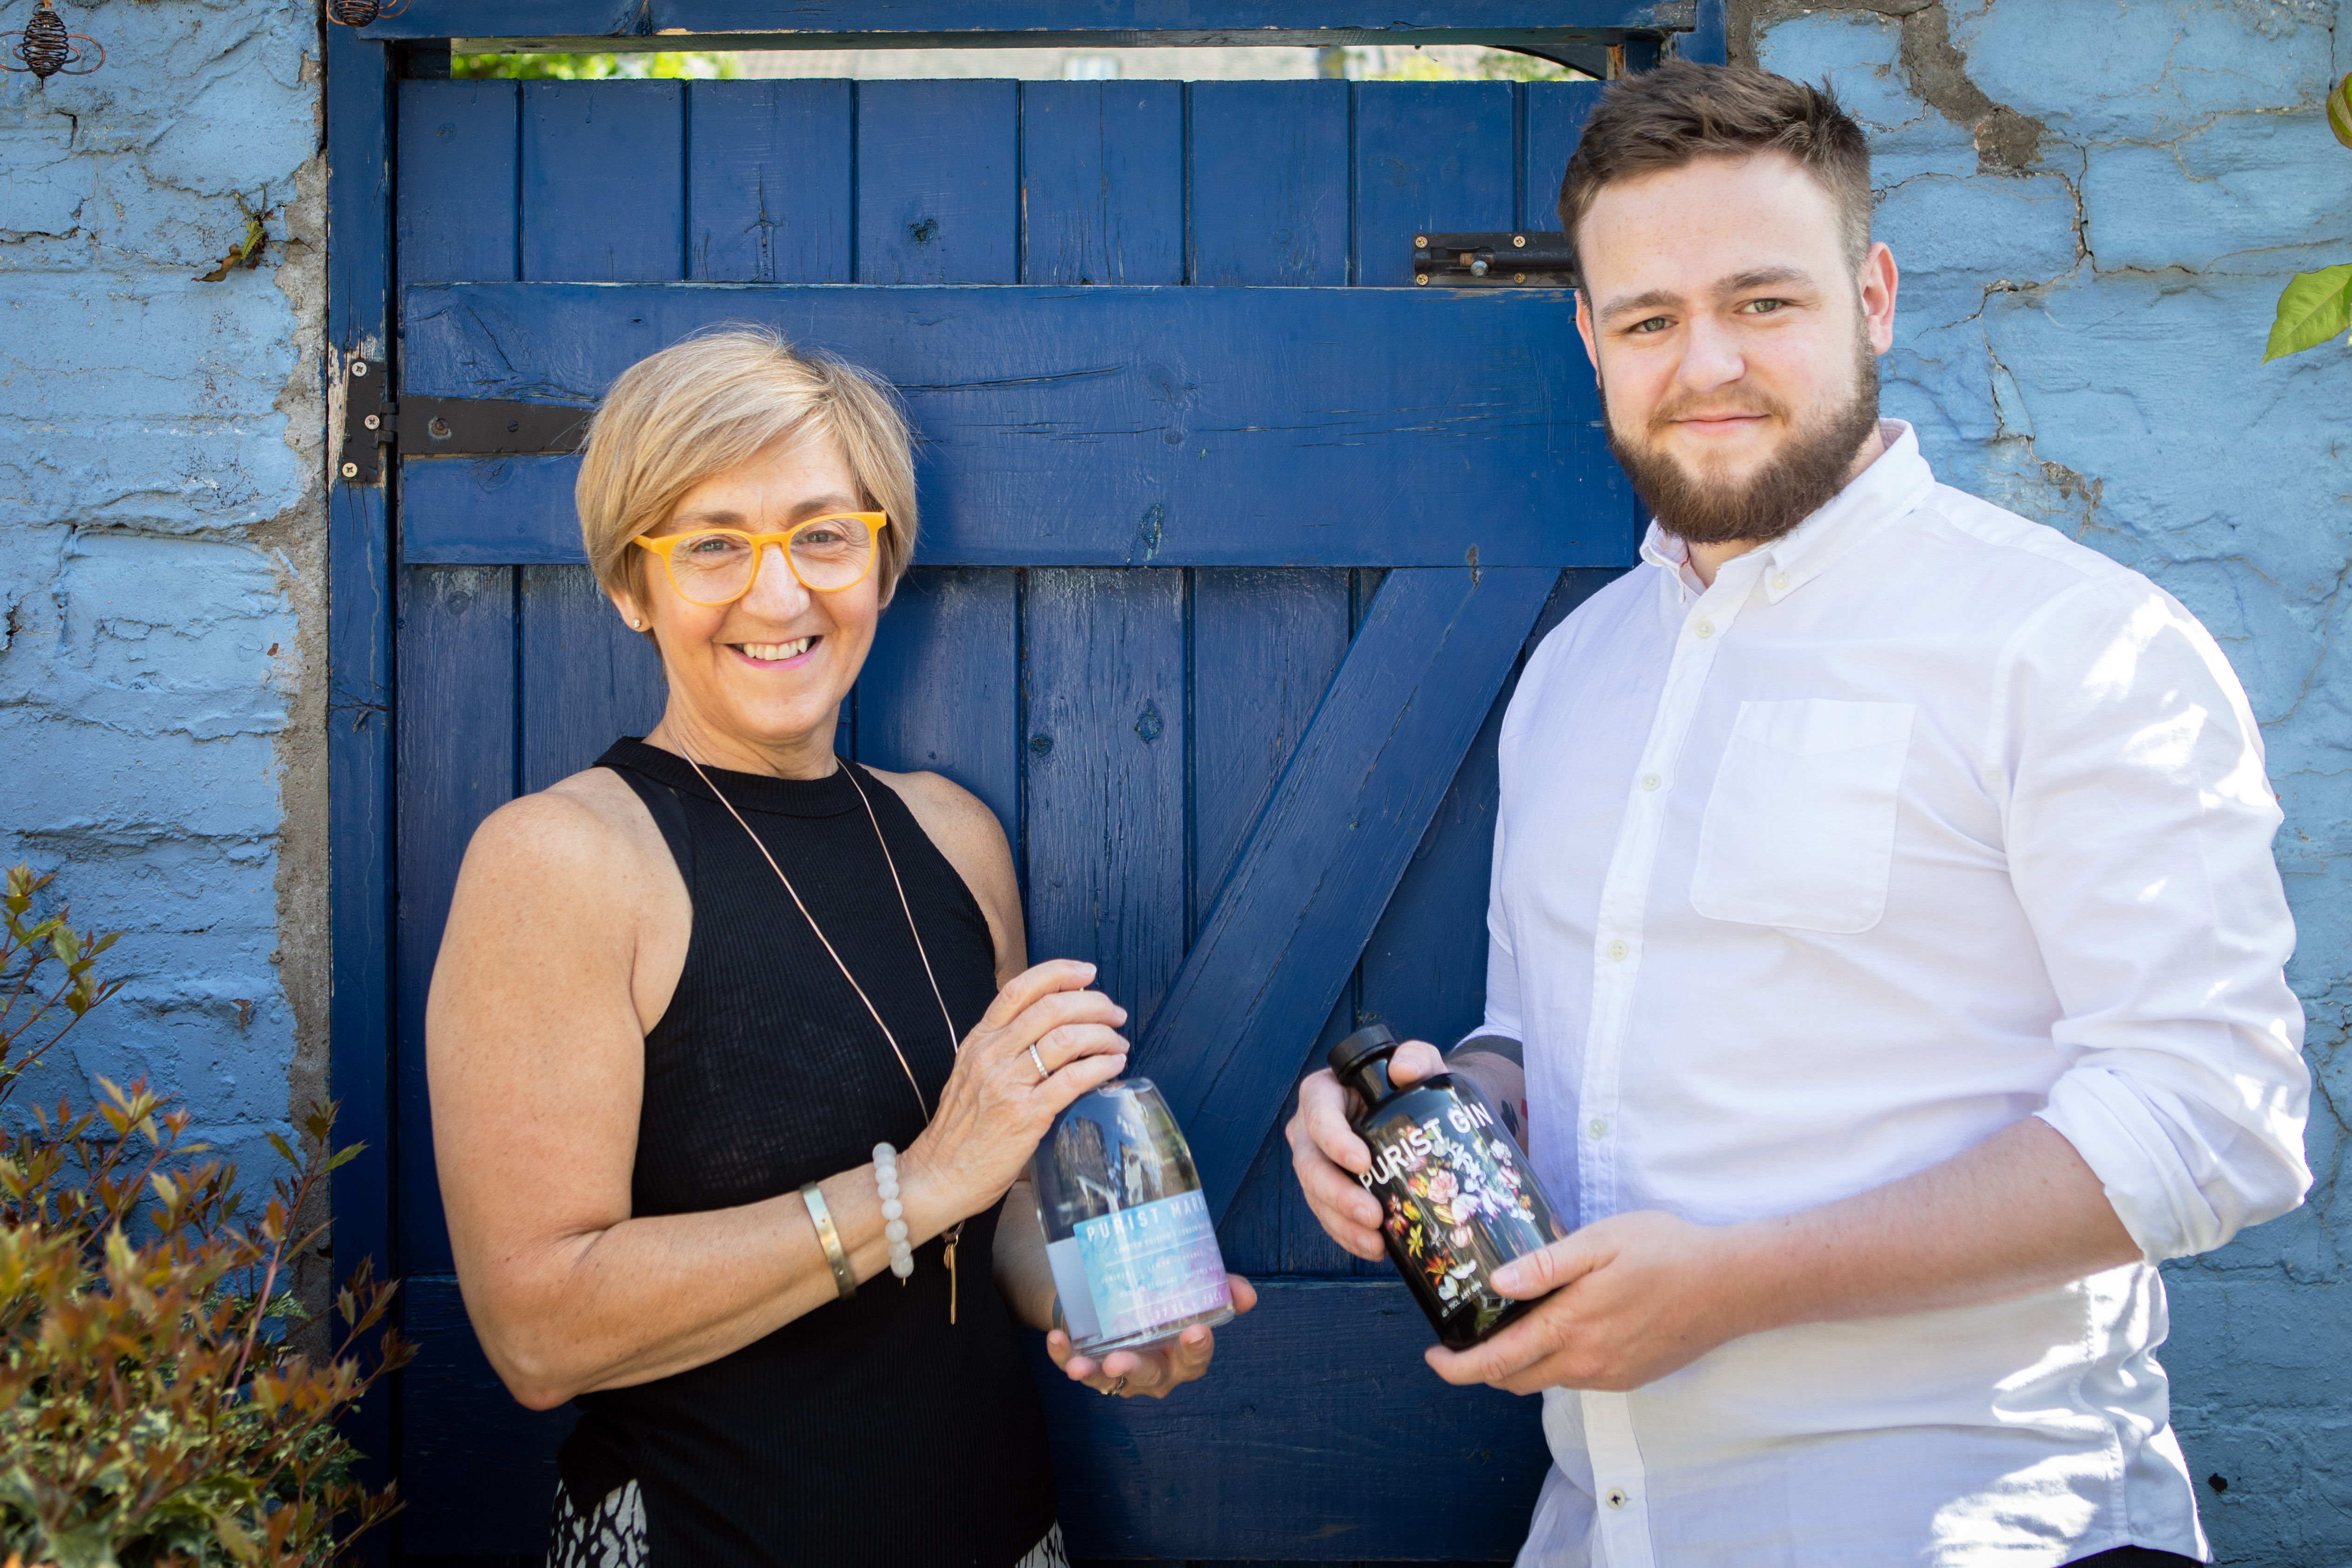 Greenshoots: Scots youngster caught selling bootleg gin at school goes legit by creating award-winning brand